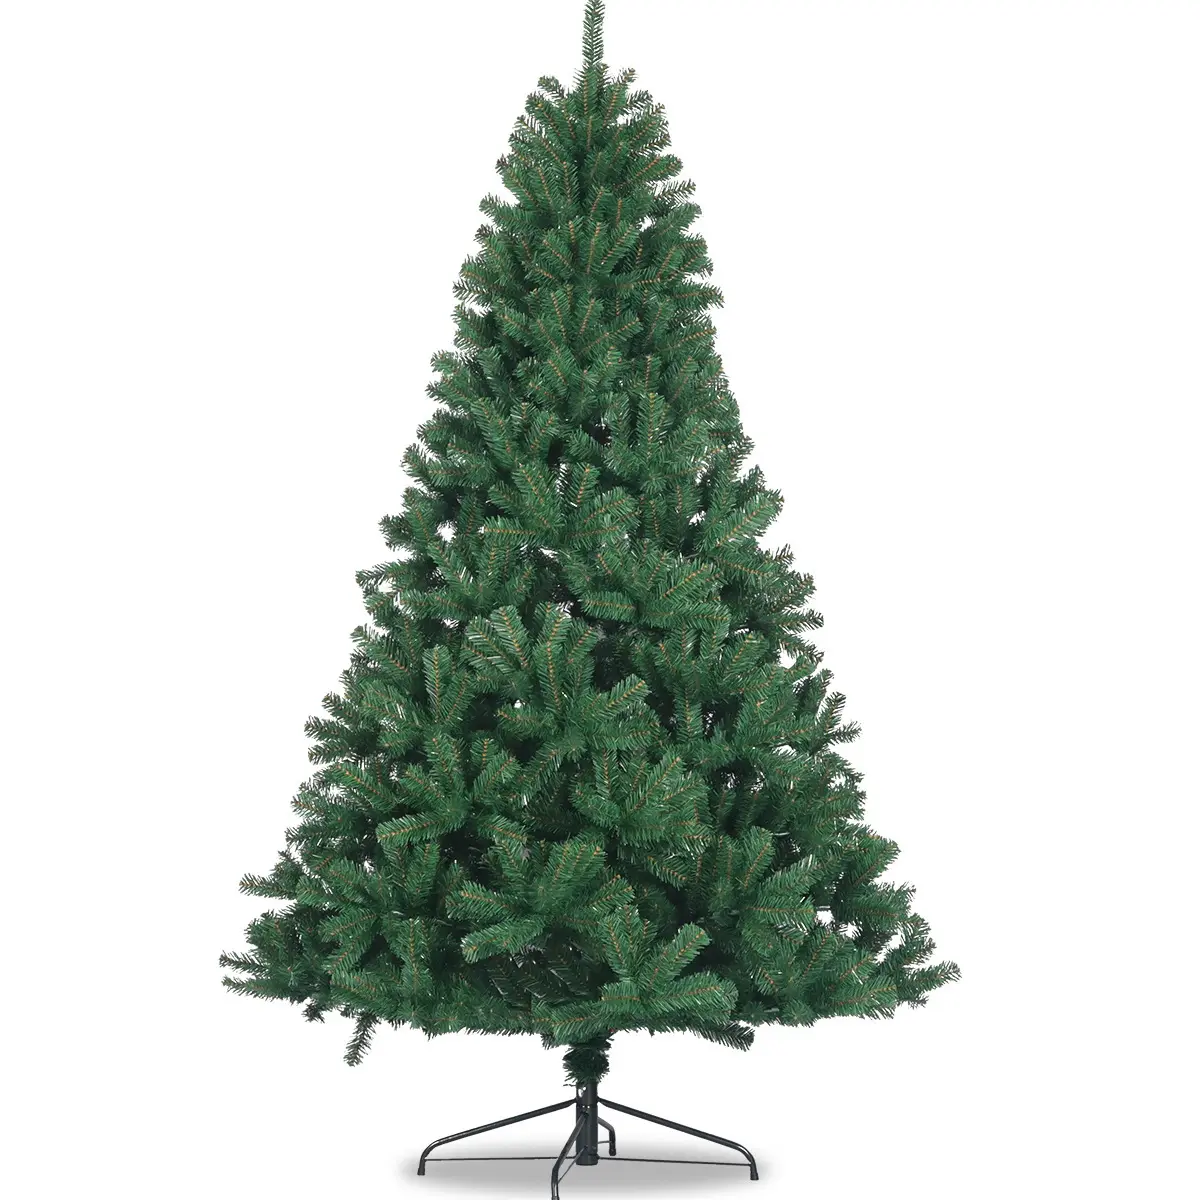 60cm 90cm 120cm 150cm 180cm 210cm 240cm PVC Christmas tree Christmas Multi Size Green simulated Christmas tree household